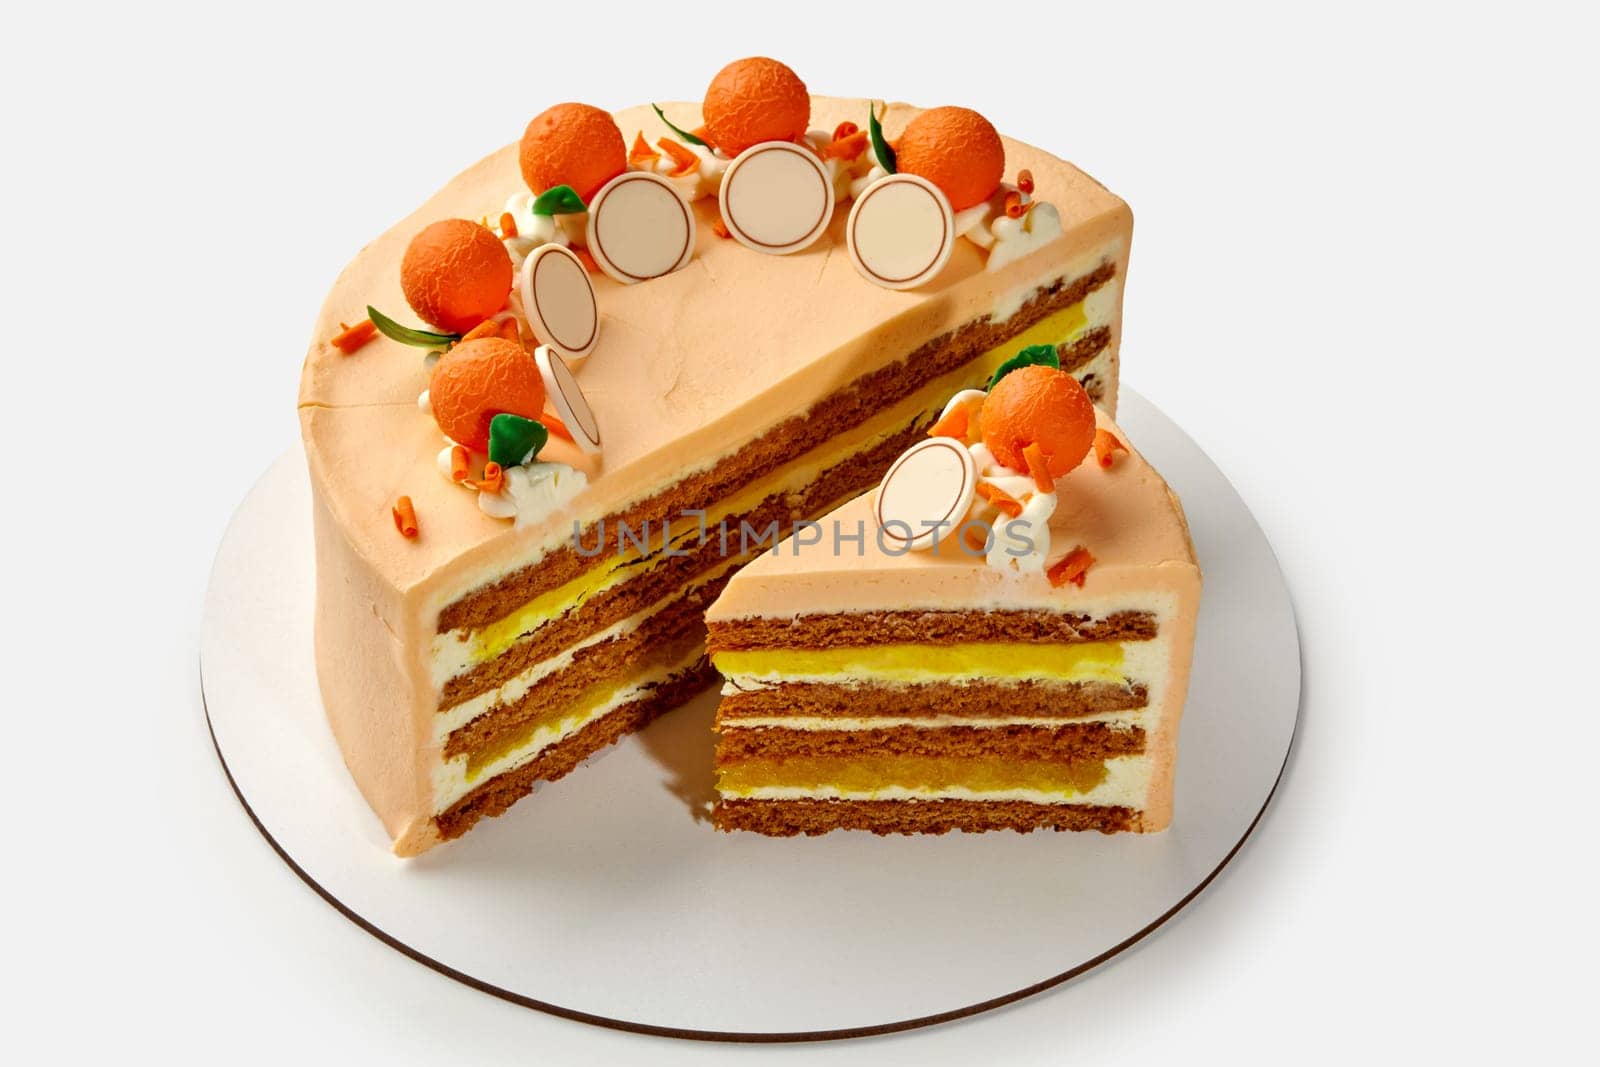 Sliced delicate honey cake with whipped sour cream and citrus confit layers decorated with colorful chocolate oranges with green leaves, presented on white background